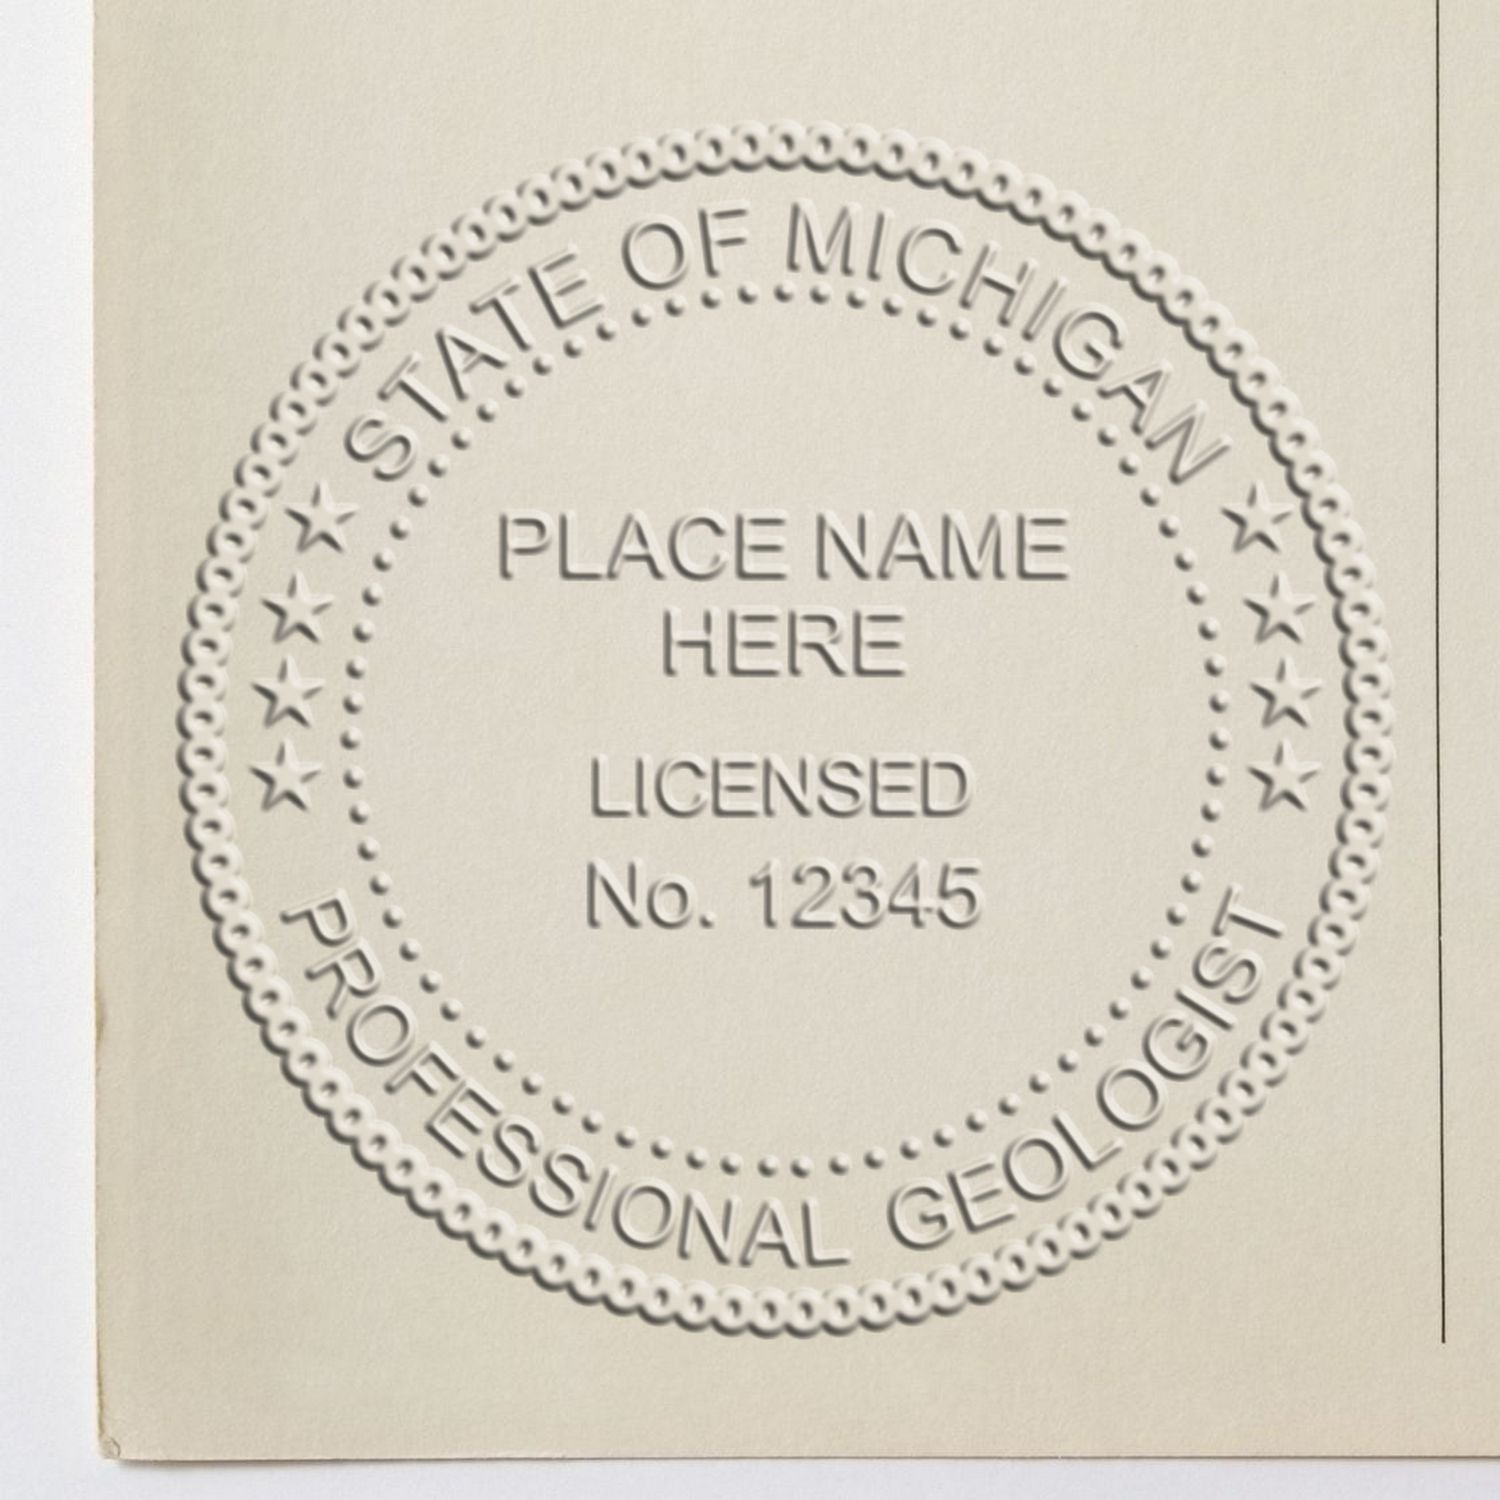 An alternative view of the State of Michigan Extended Long Reach Geologist Seal stamped on a sheet of paper showing the image in use